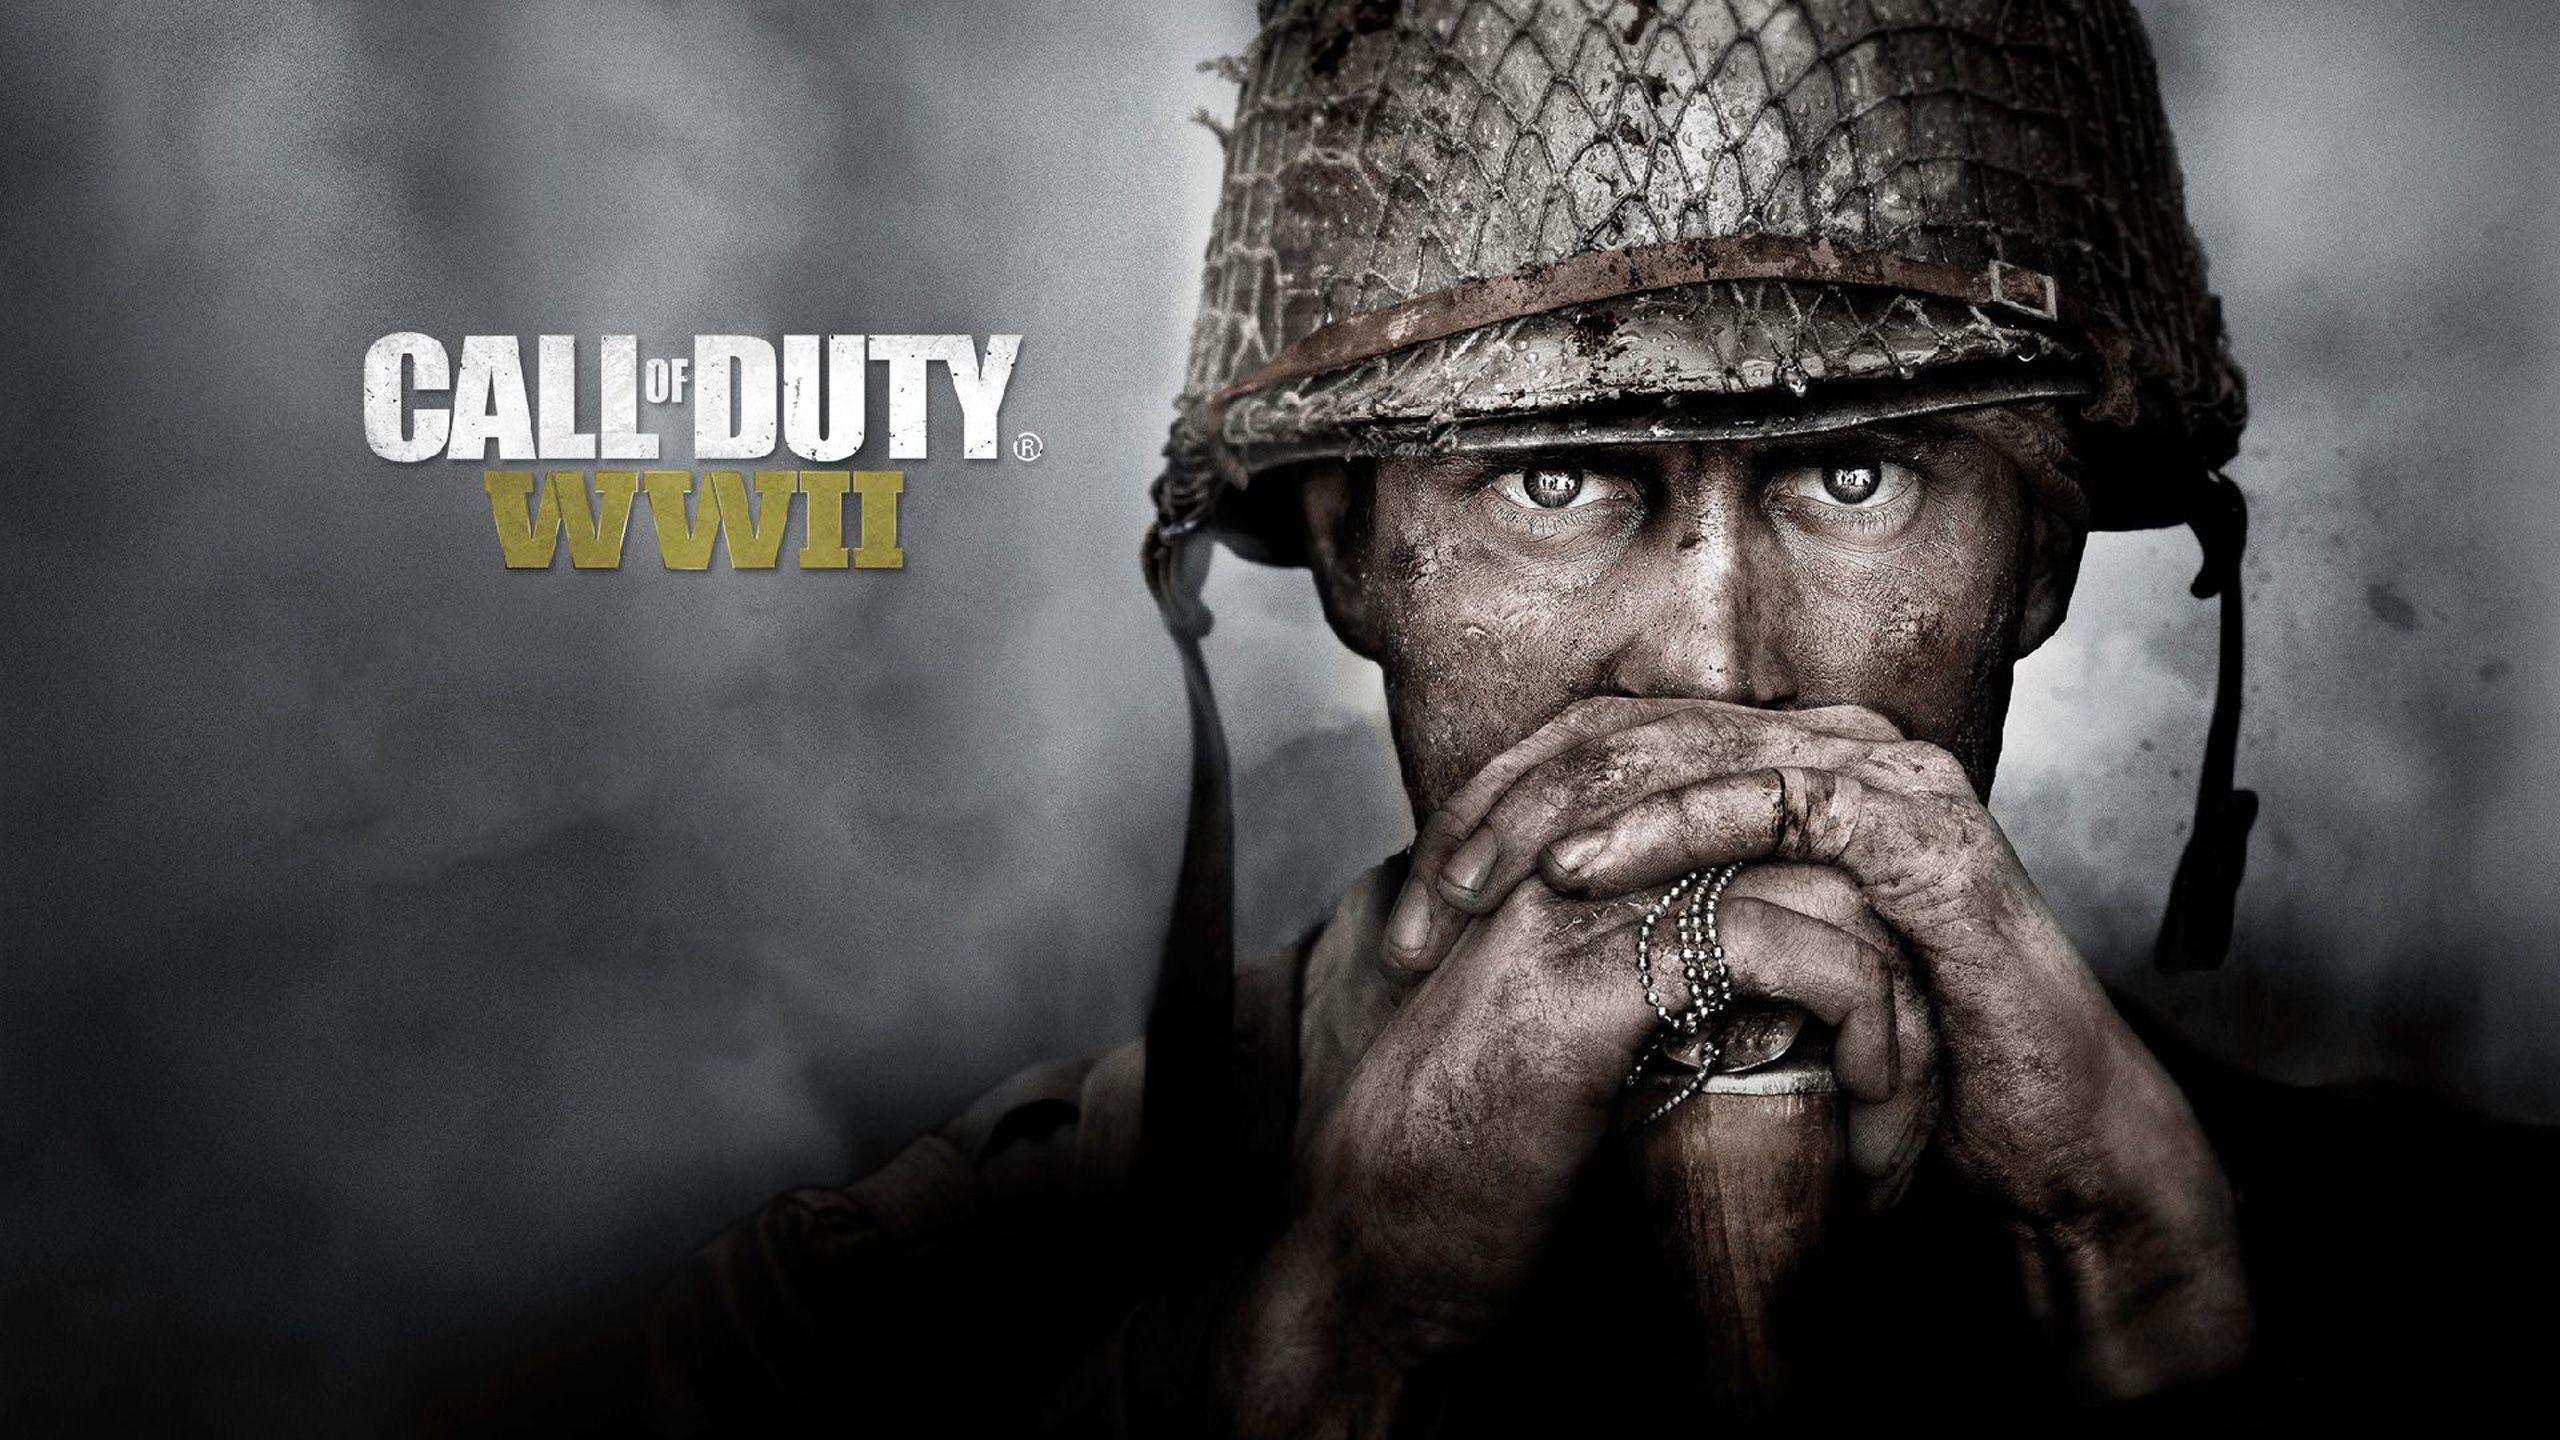 Call of Duty WWII Wallpaper Background 61209 2560x1440 px